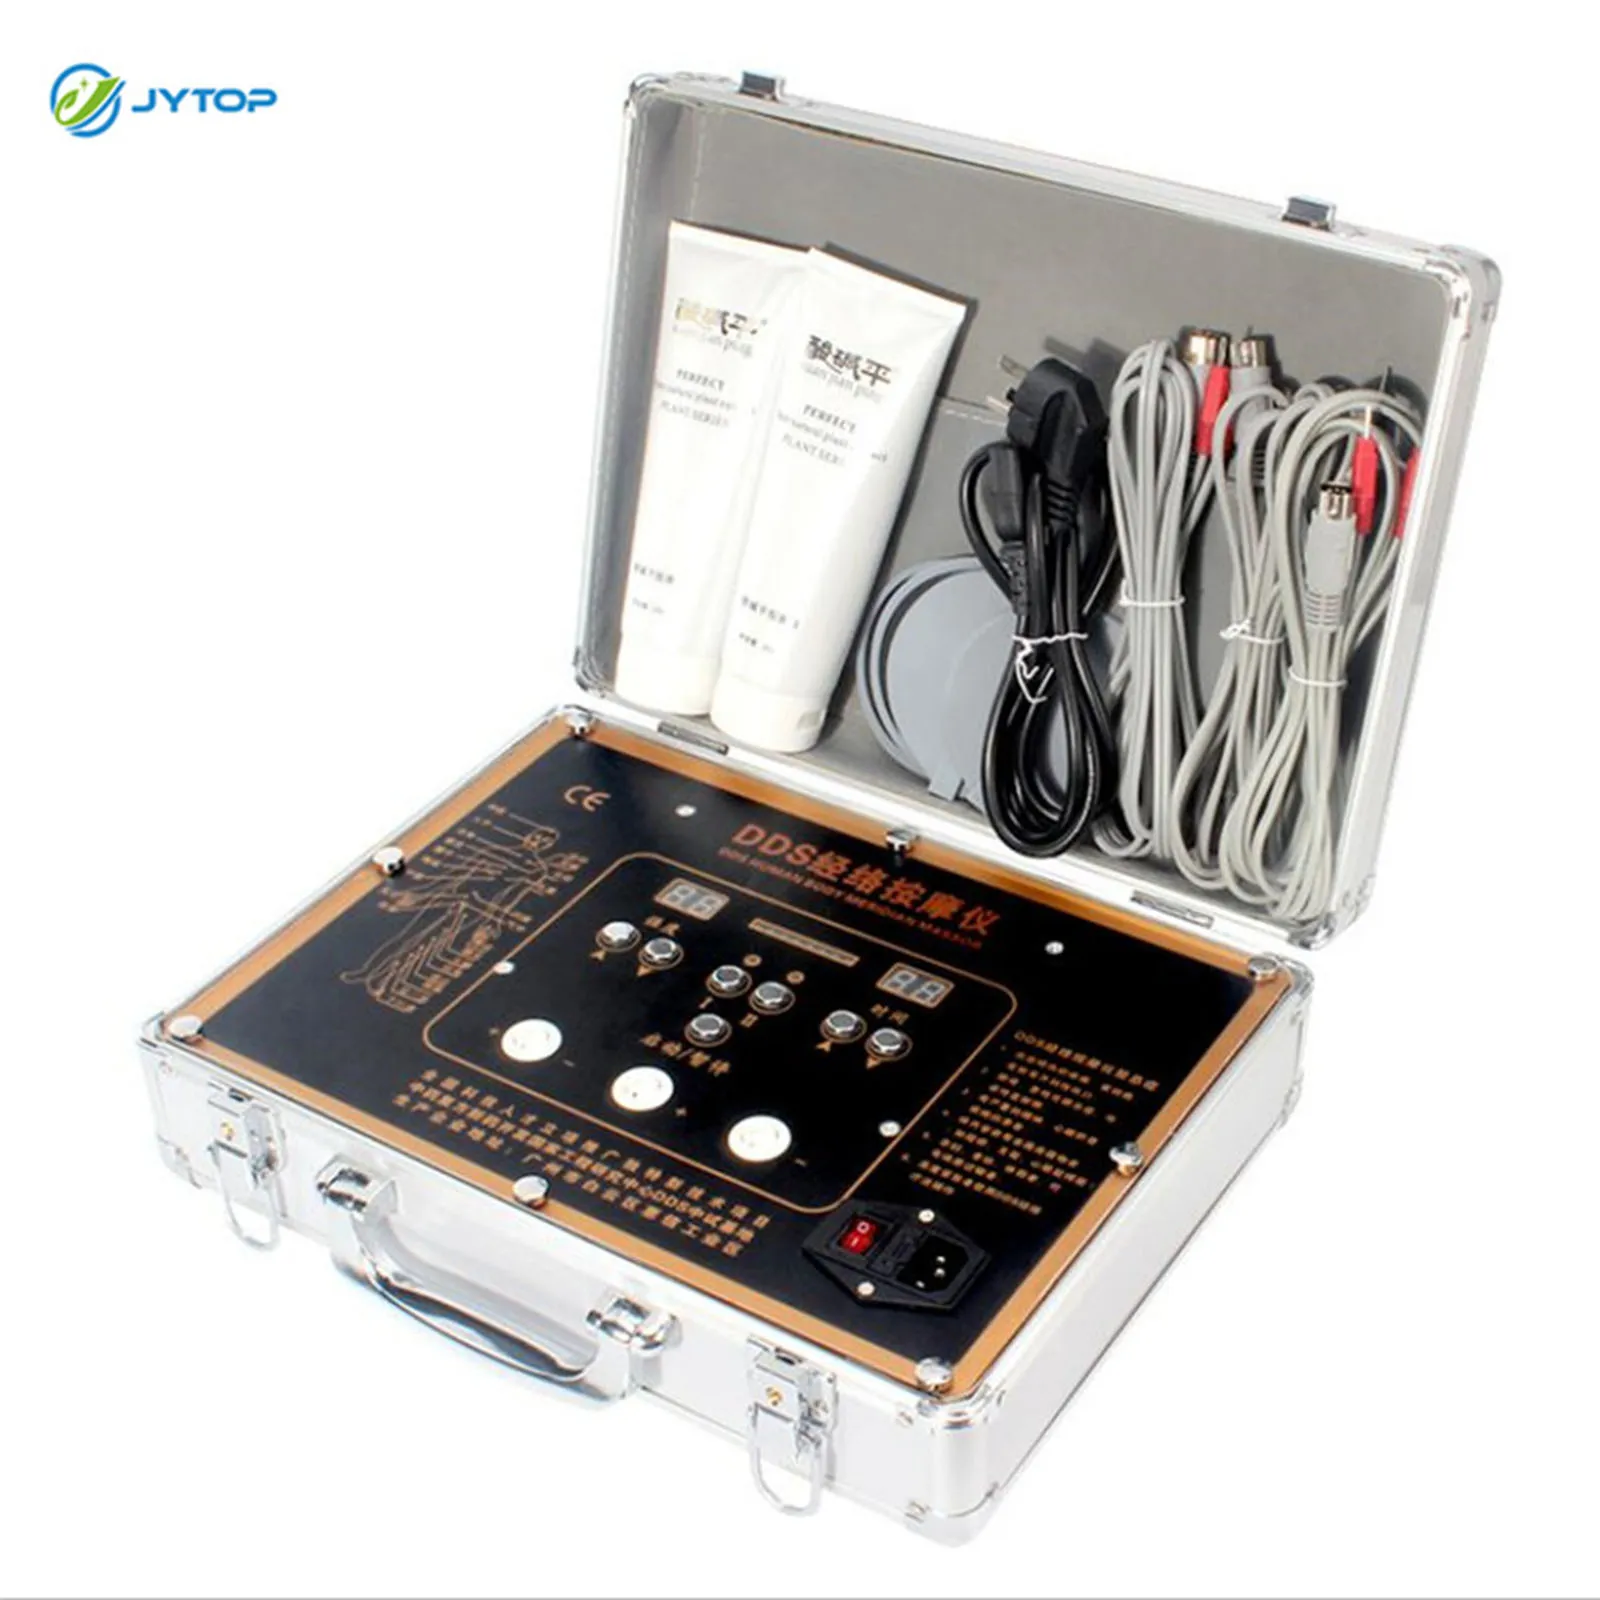 JYTOP DDS Bio Electric Massage Machine multi-function household DDS electrotherapy device body massager